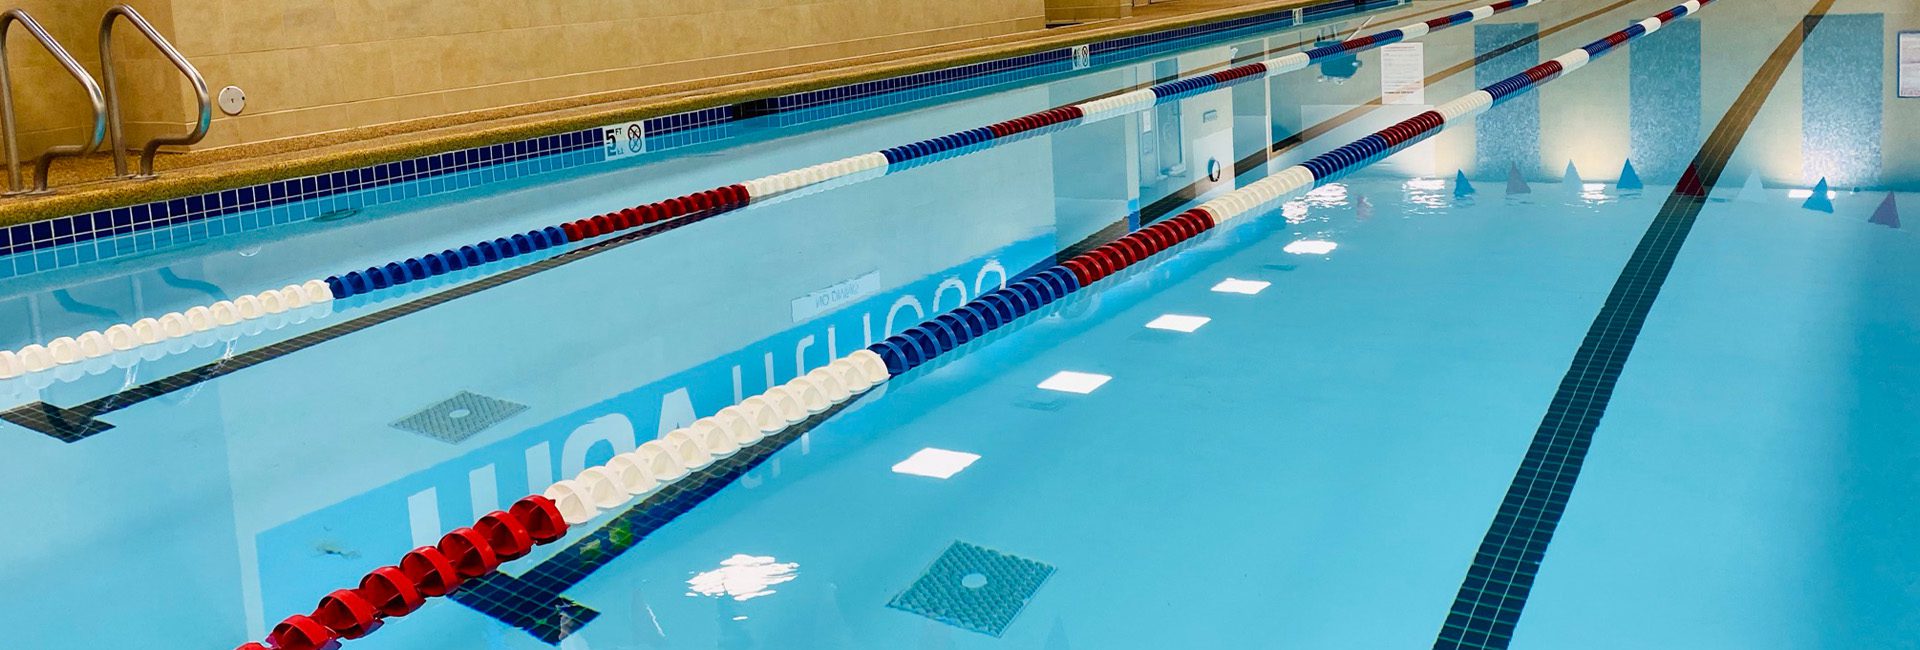 indoor pool with dividers for laps in a gym in everett